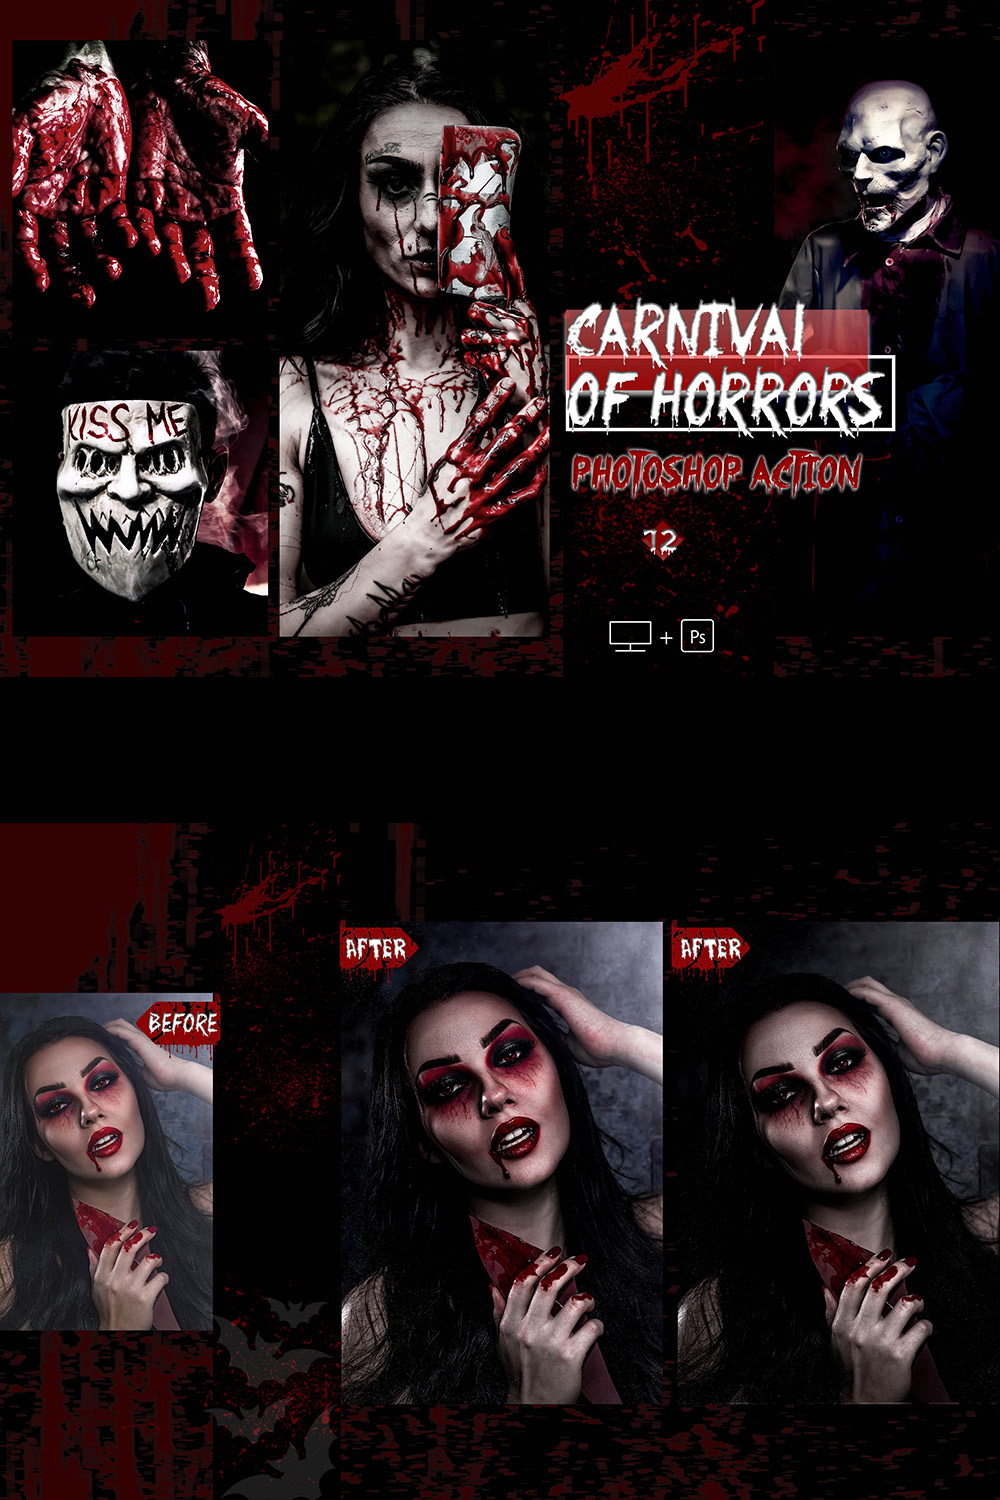 12 Photoshop Actions, Carnival Of Horrors Ps Action, Moody Halloween ACR Preset, Fall Filter, Lifestyle Theme For Instagram, Autumn Presets, Warm portrait pinterest preview image.